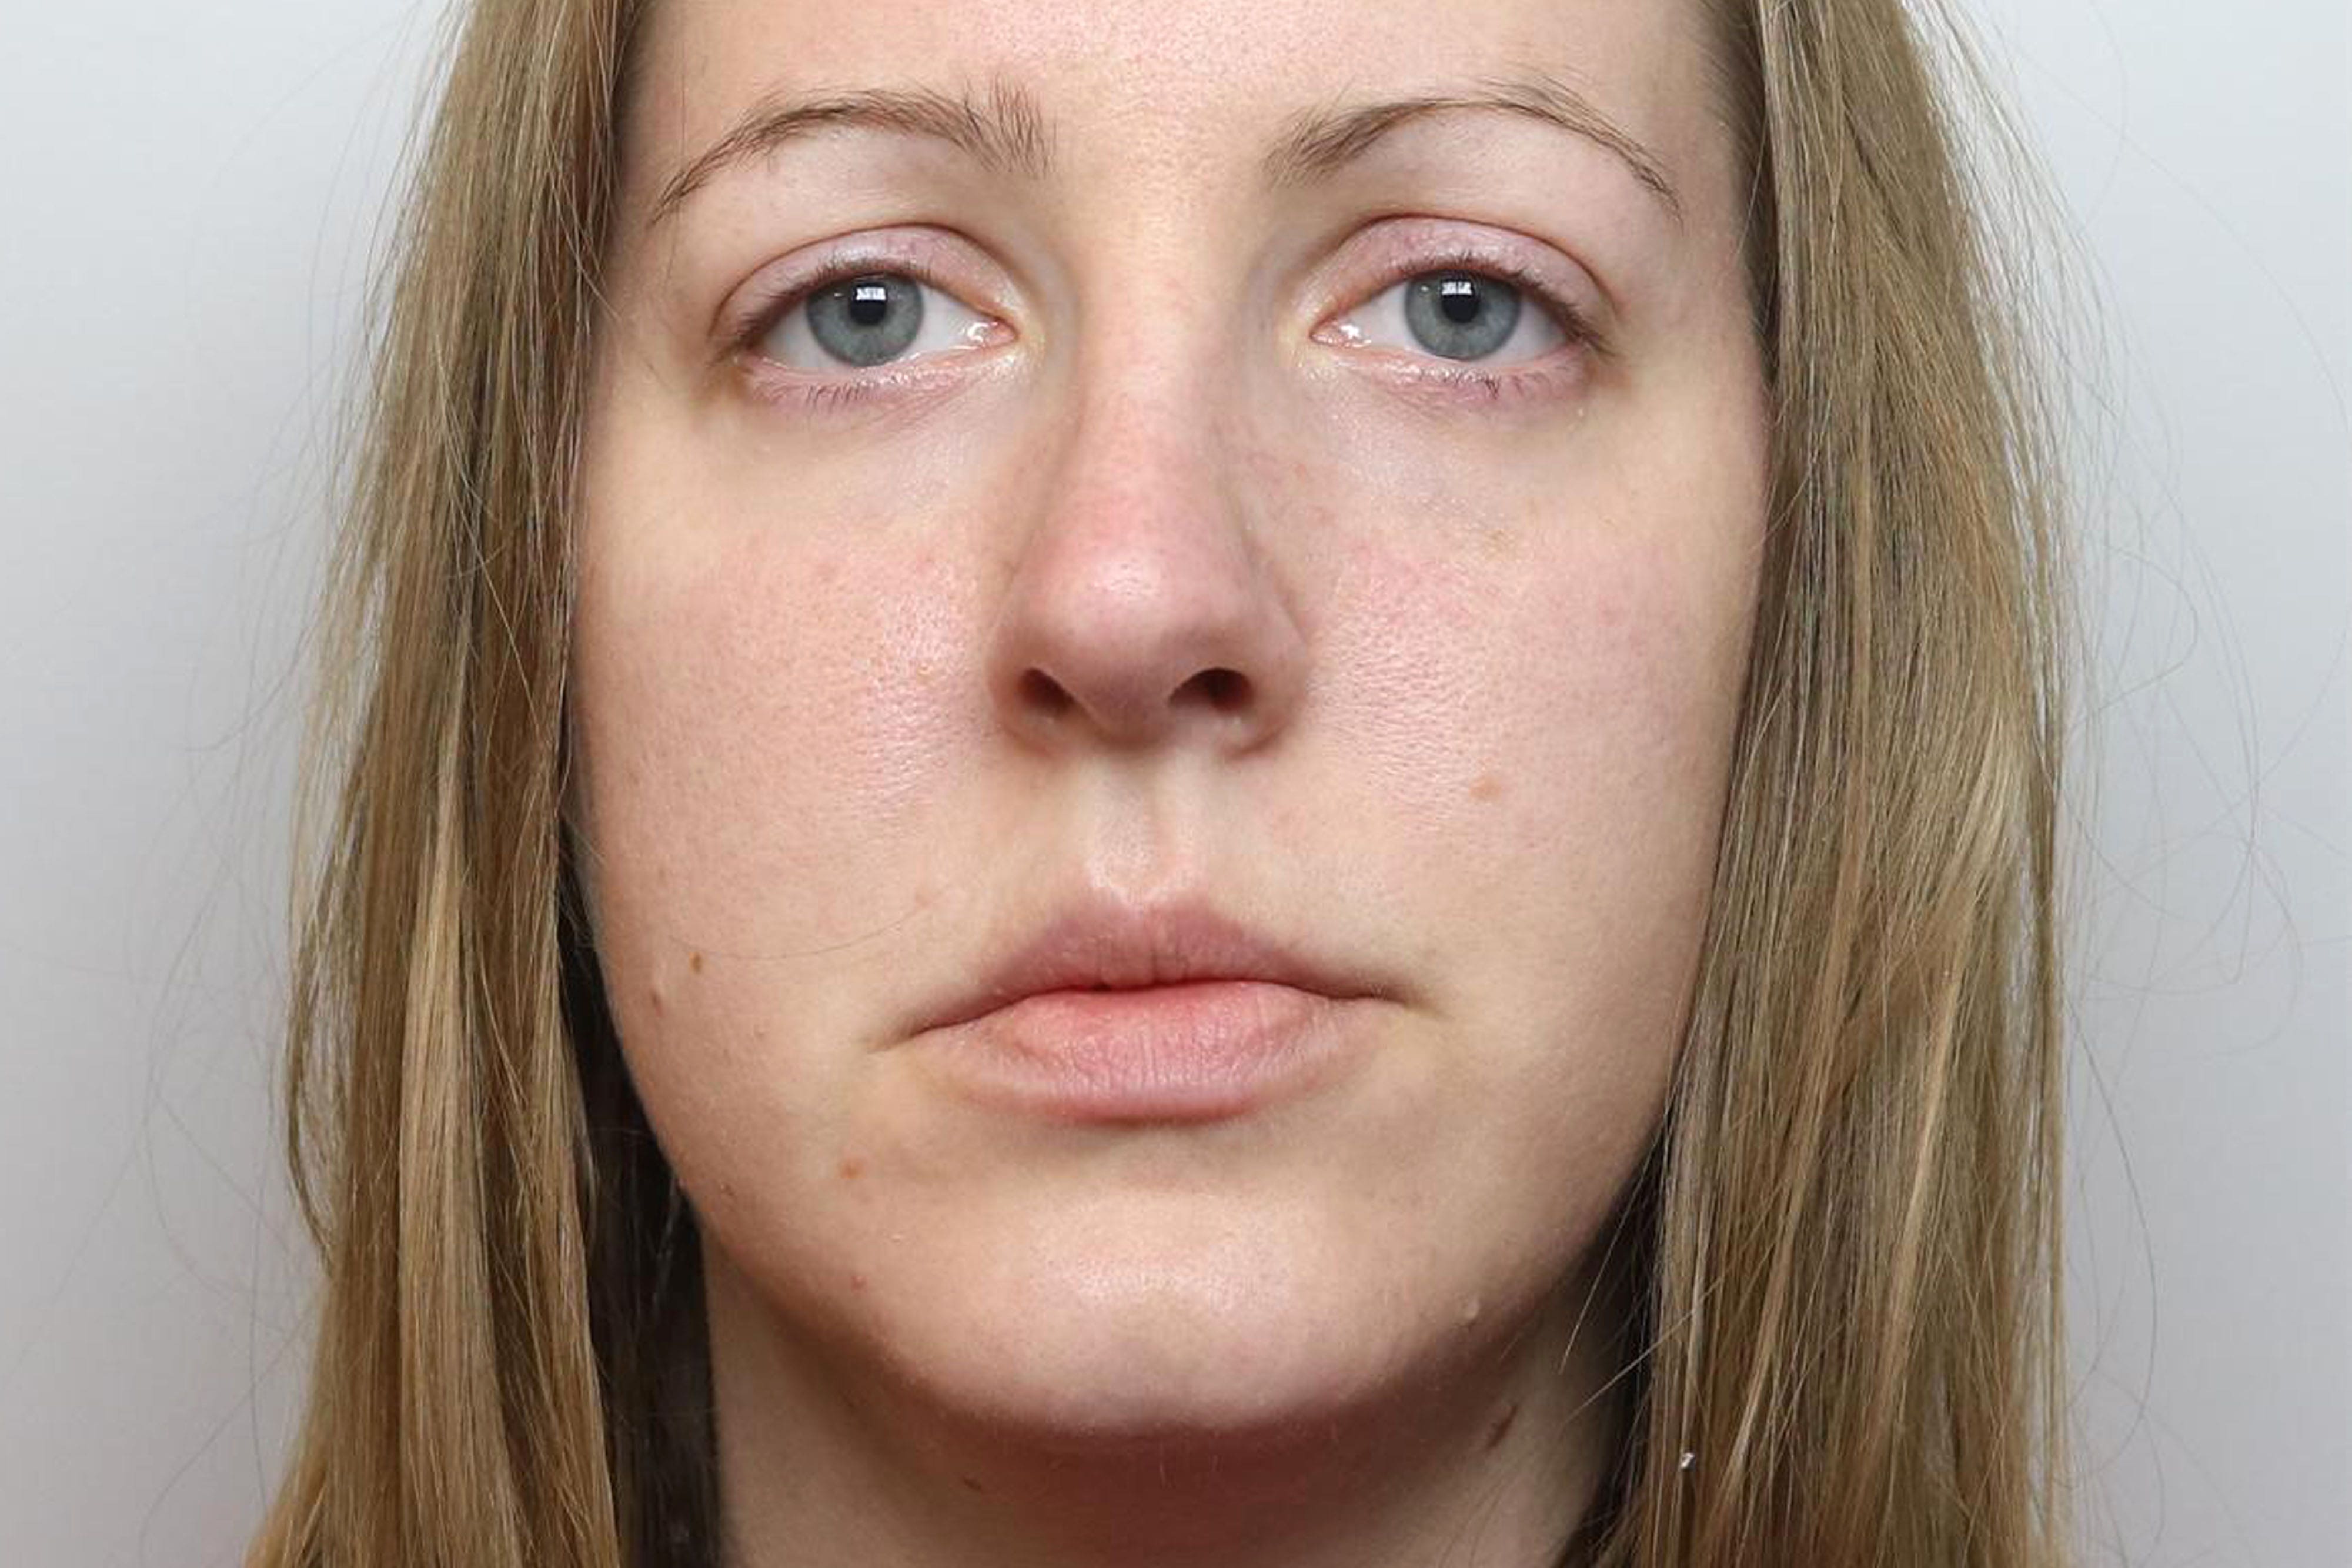 Letby, from Hereford, denied all the offences and formally lodged an appeal against her conviction at the Court of Appeal last month